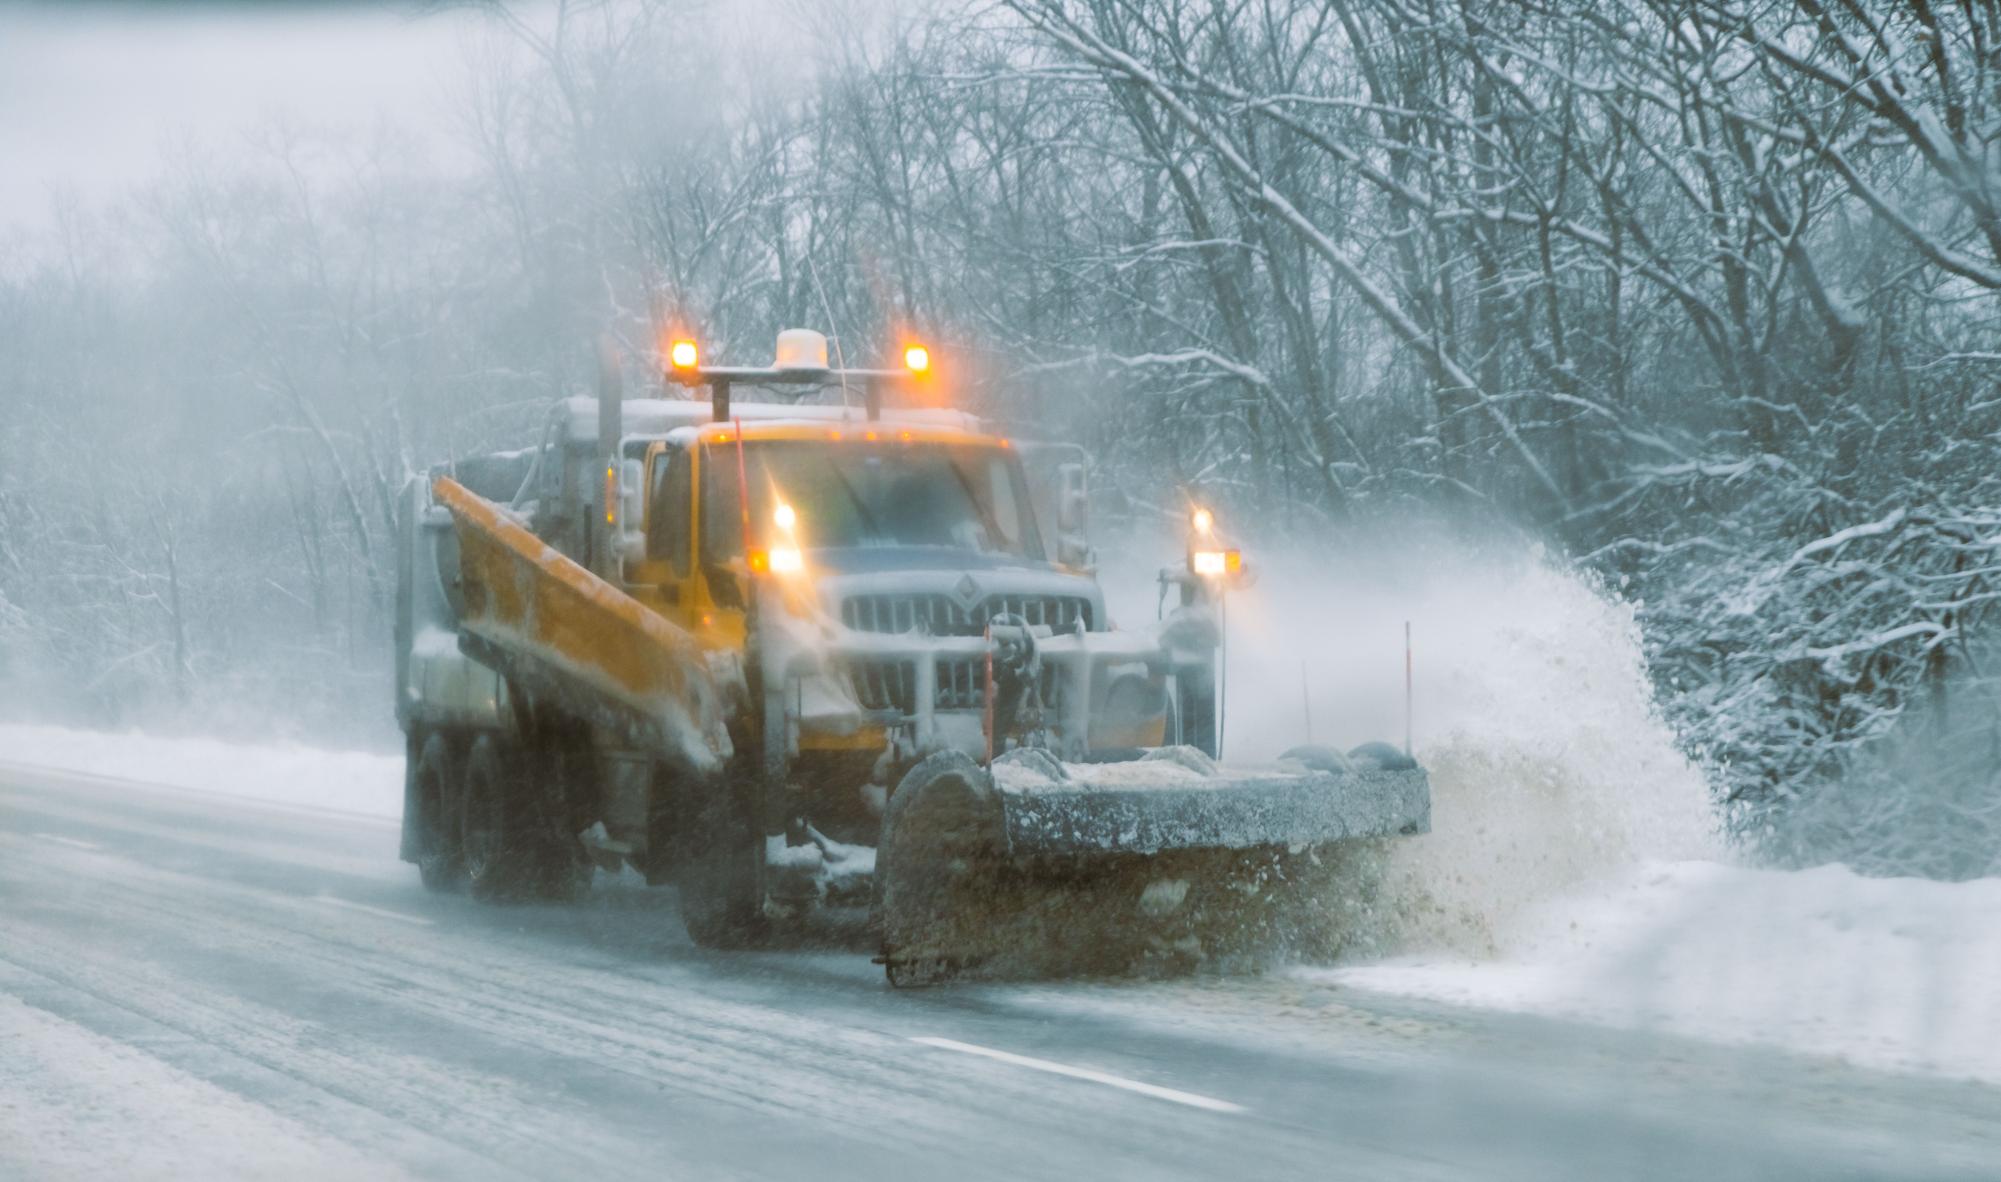 A snow plow truck plowing snow on a road.